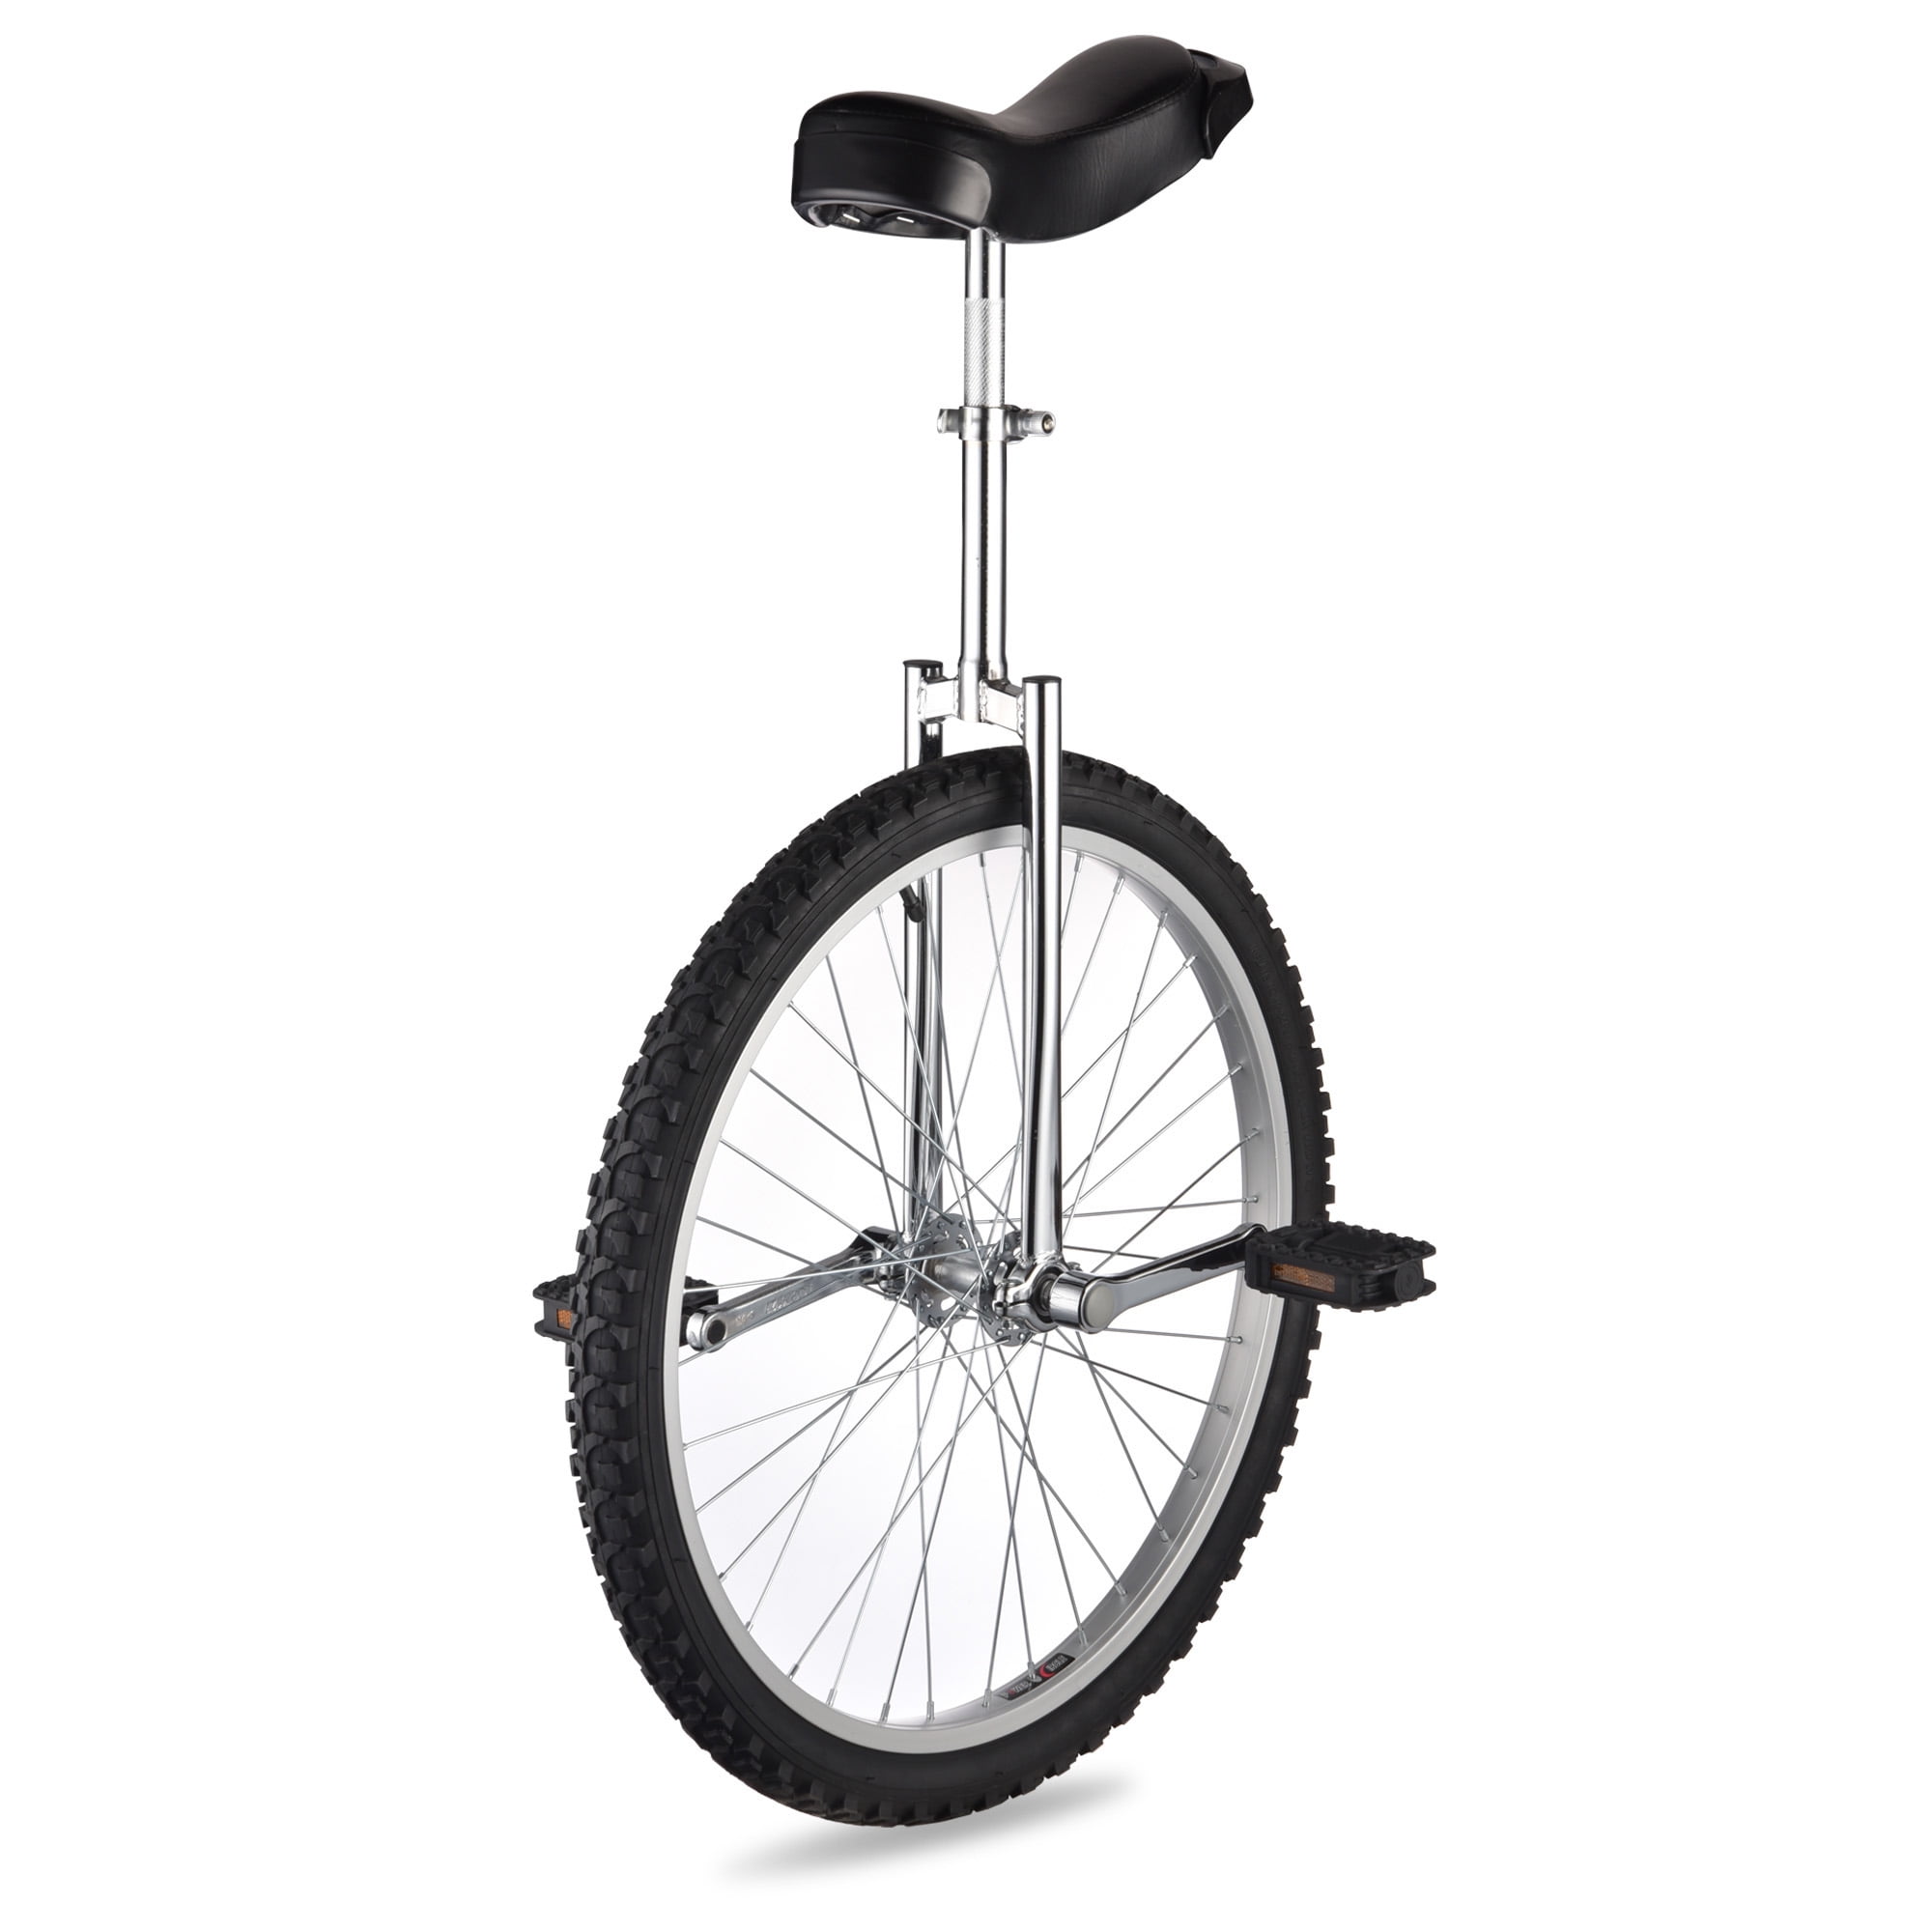 24" Unicycle Cycling Scooter Circus Bike Skidproof Tire Balance Exercise Silver for sale online 